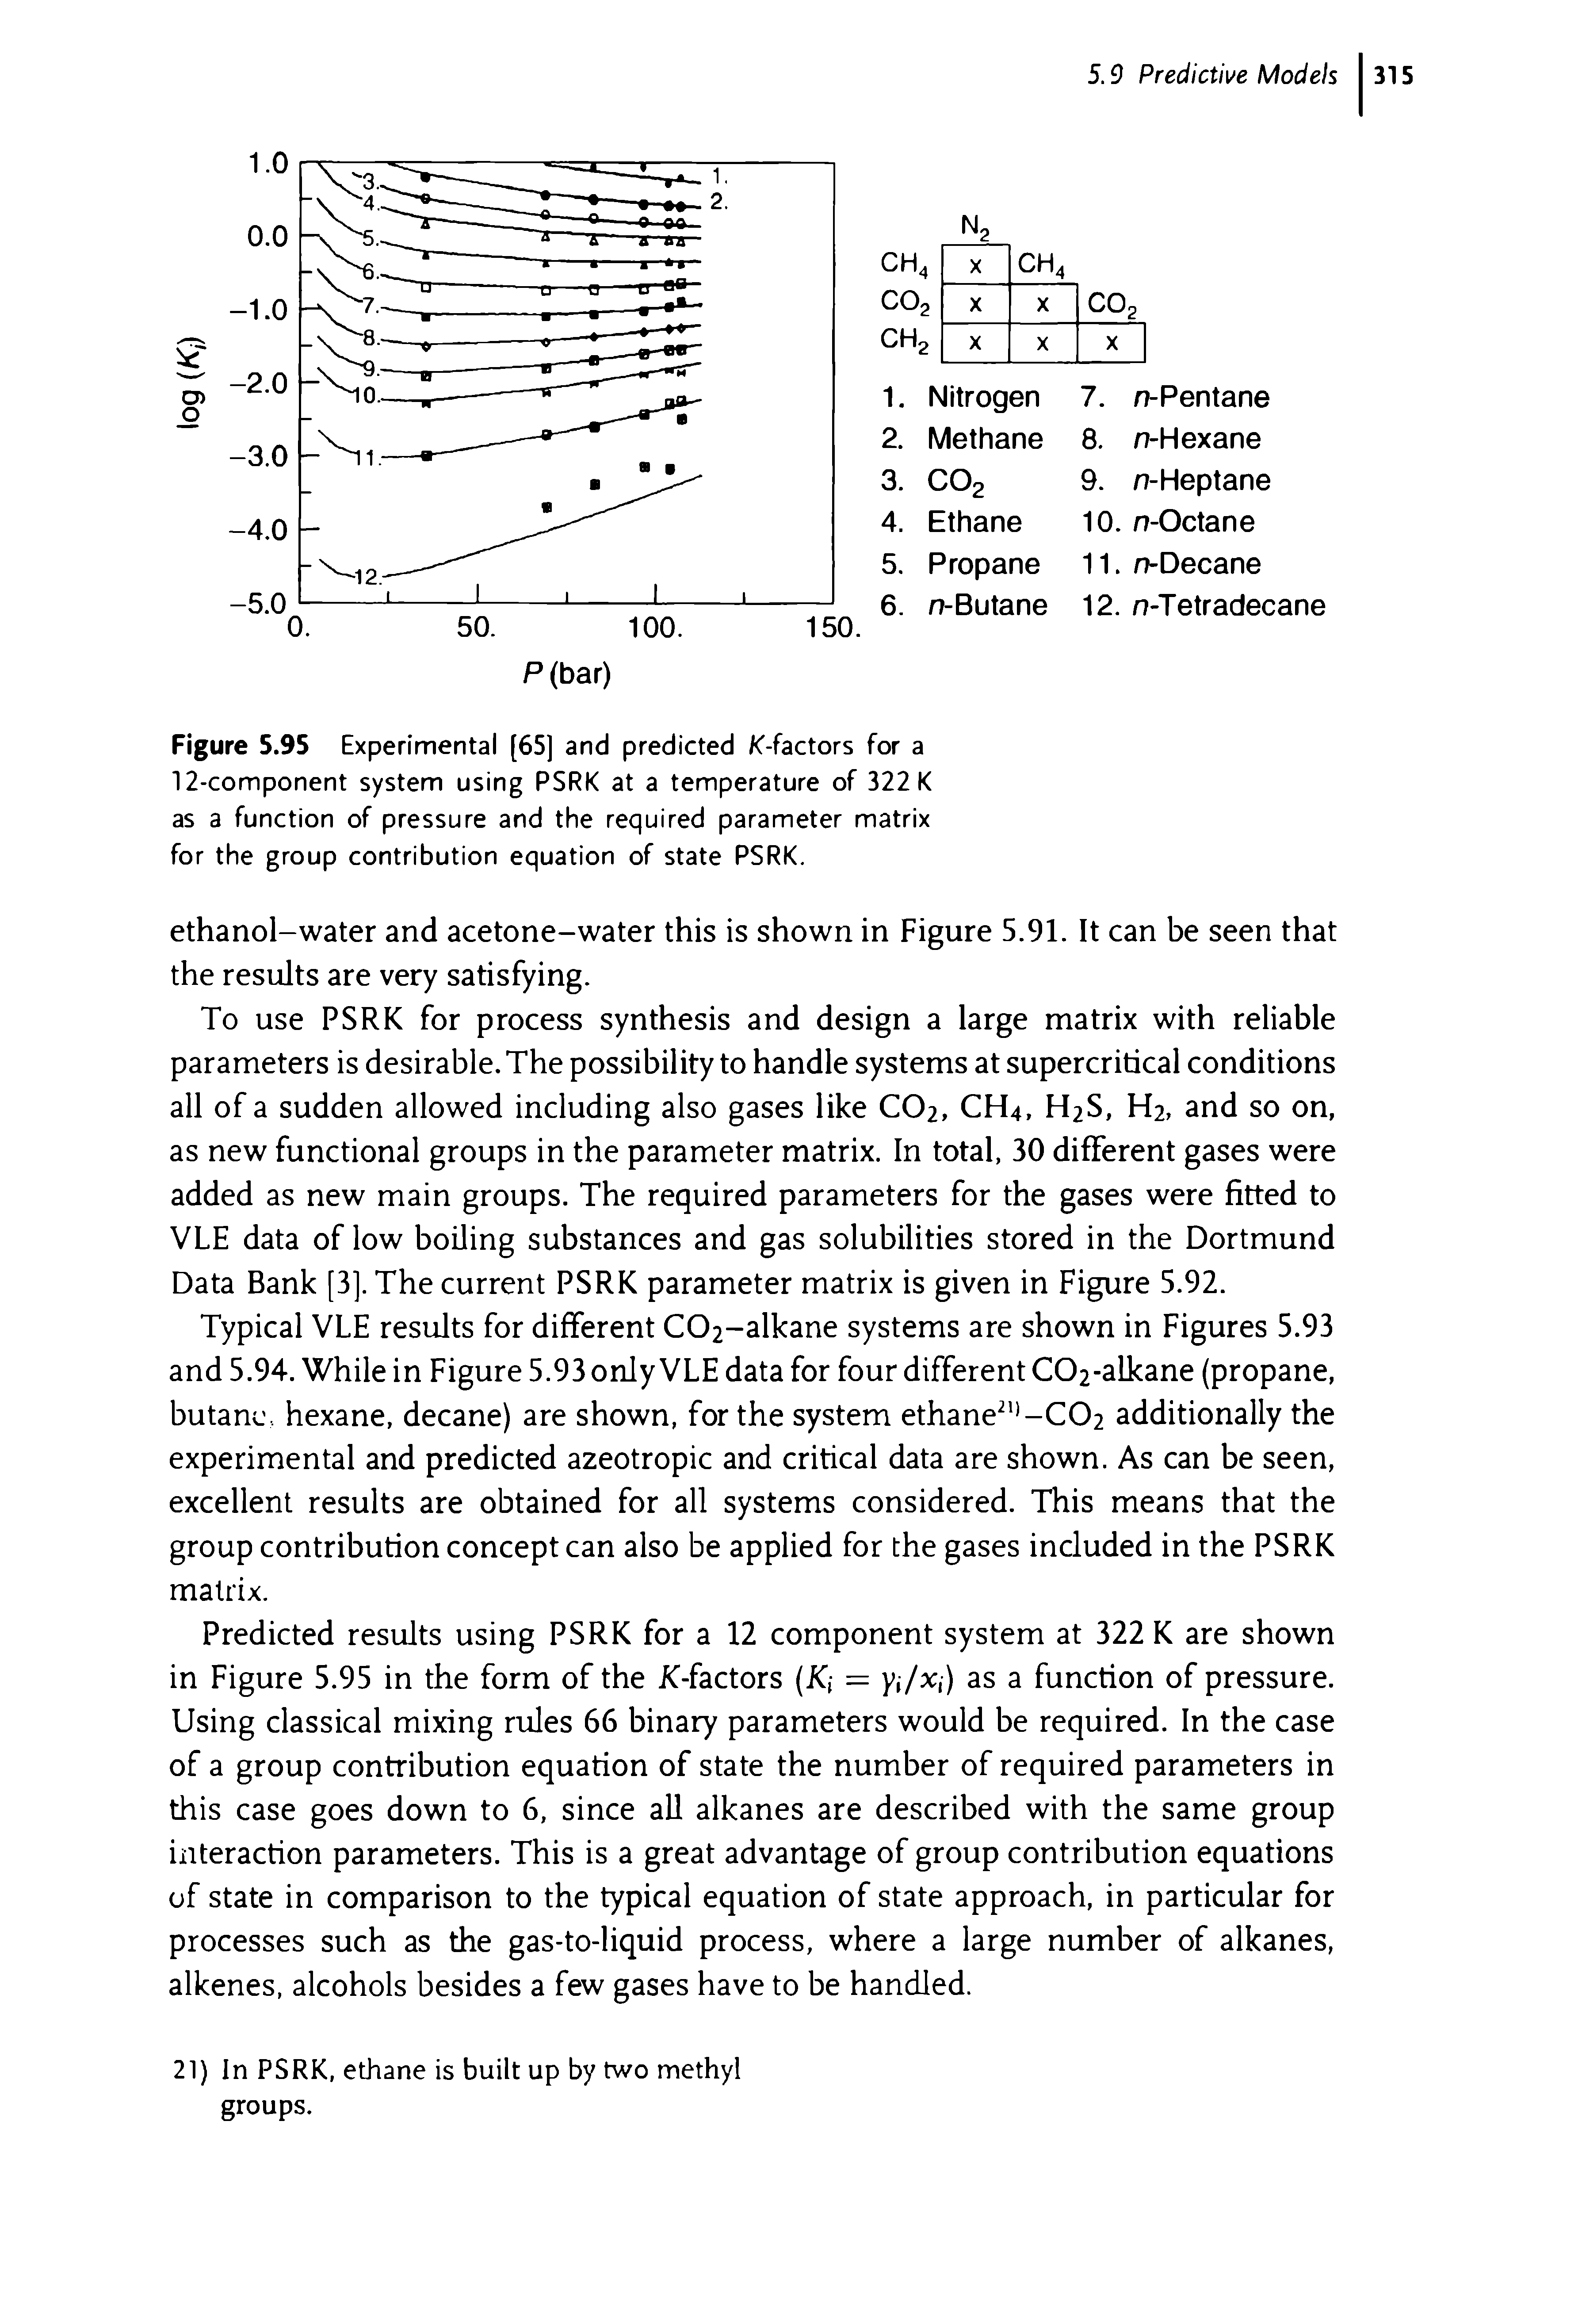 Figure 5.95 Experimental [65] and predicted /C-factors for a 12-component system using PSRK at a temperature of 322 K as a function of pressure and the required parameter matrix for the group contribution equation of state PSRK.